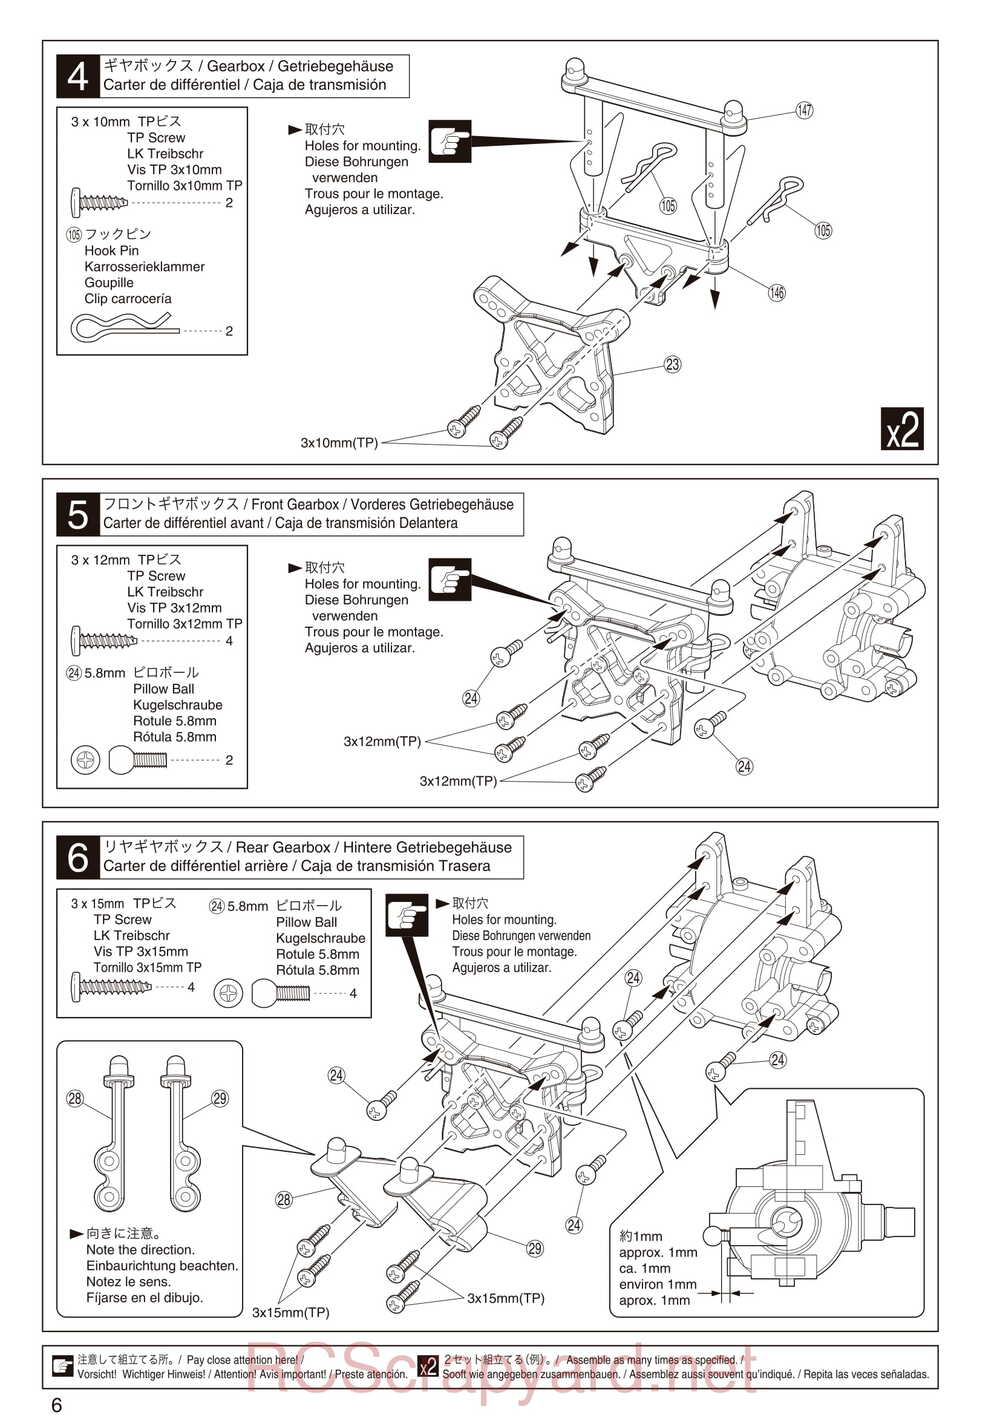 Kyosho - 31097 - DST - Manual - Page 06